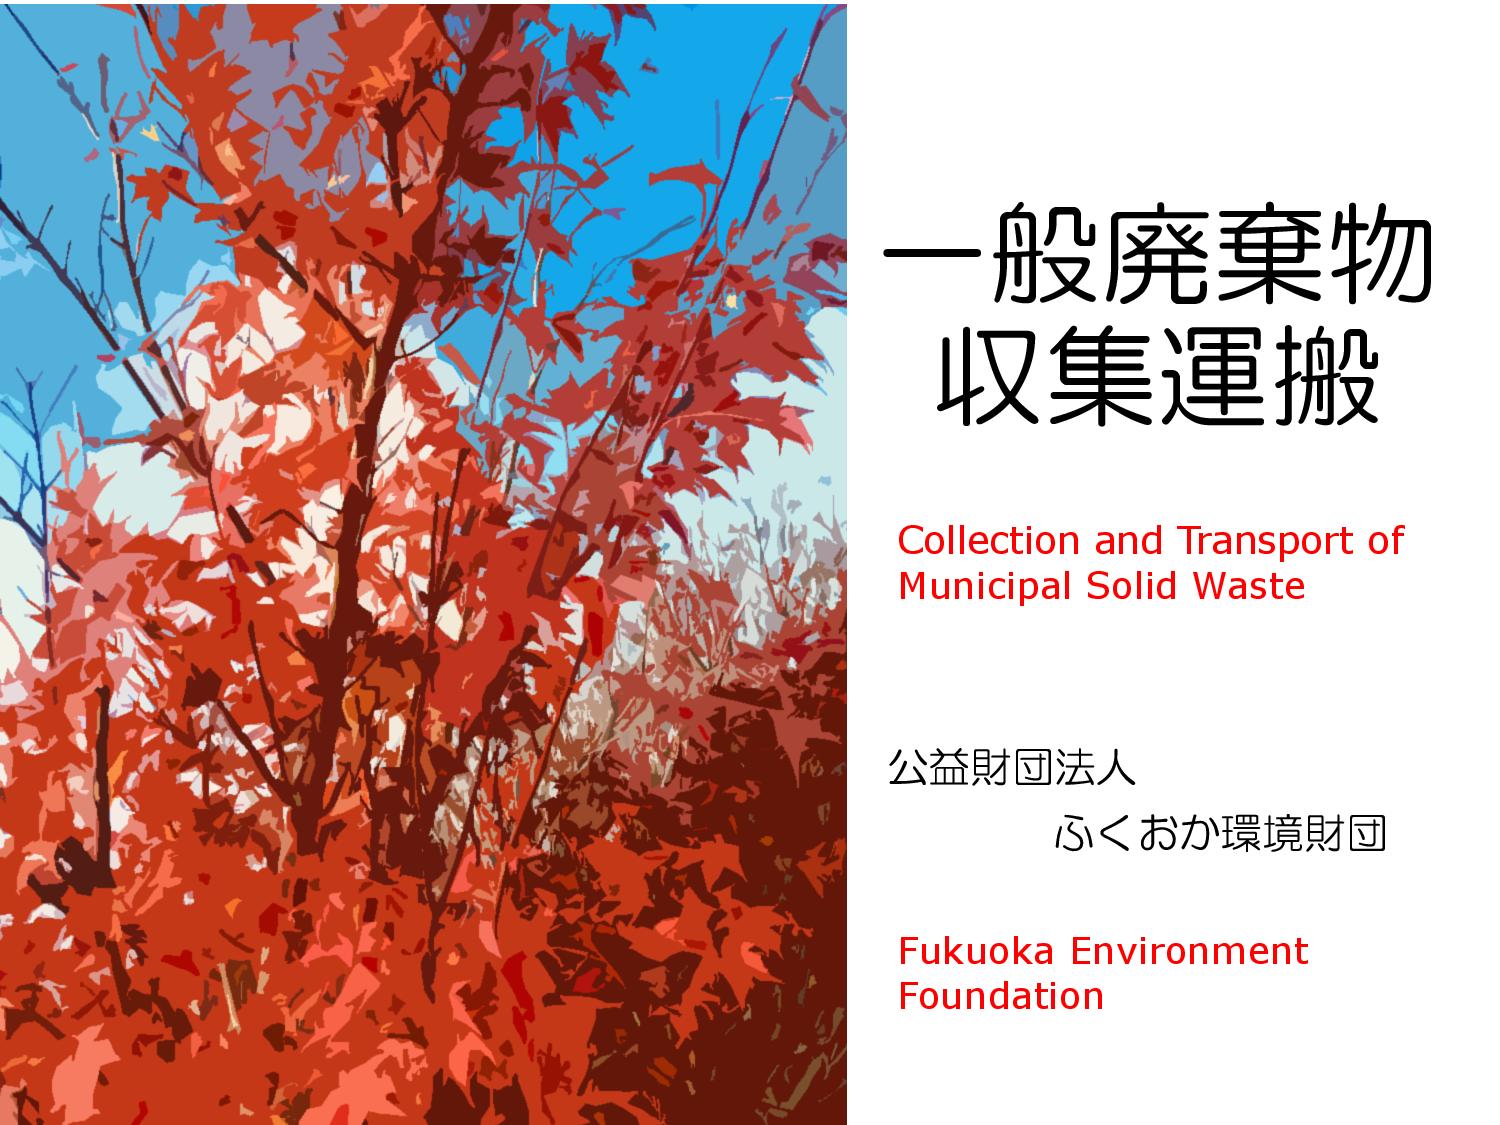 Collection and Transport of Municipal Solid Waste – Fukuoka Environment Foundation / ふくおか環境財団：Expert Group Meetings 2018